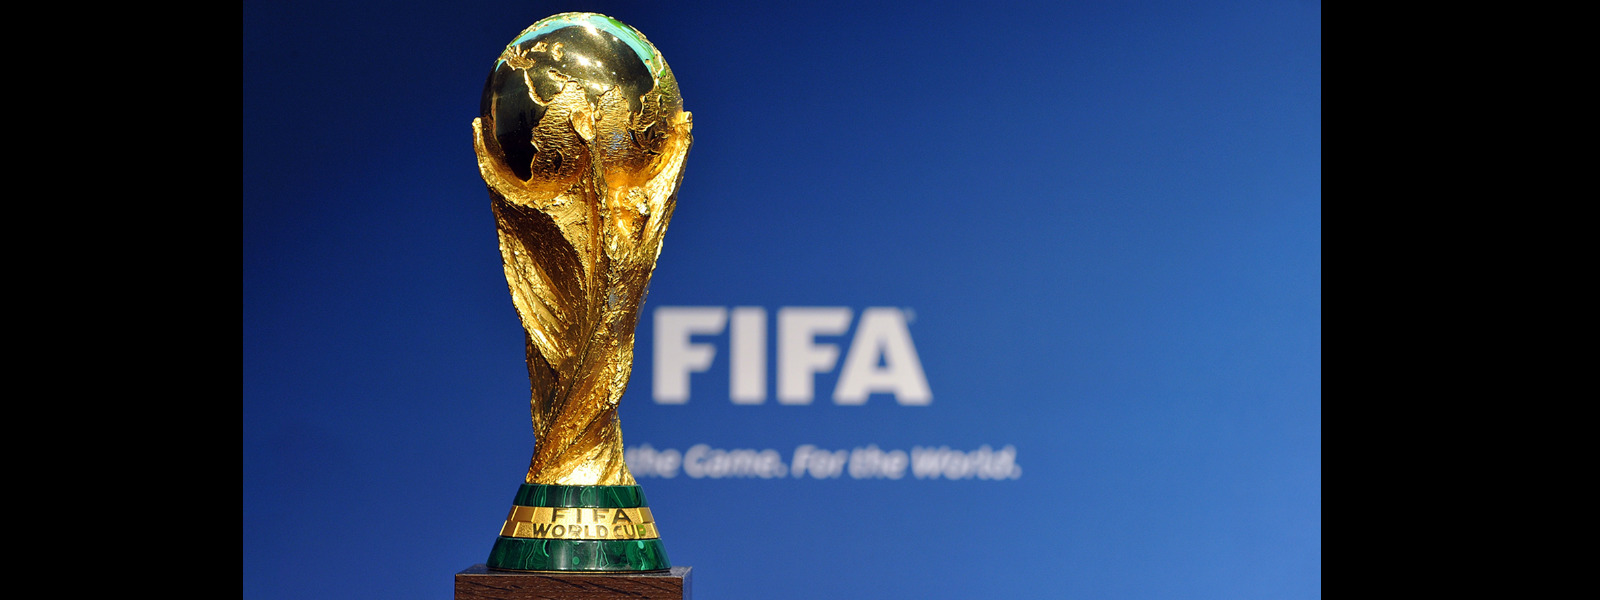 FIFA World Cup trophy returns to Russia